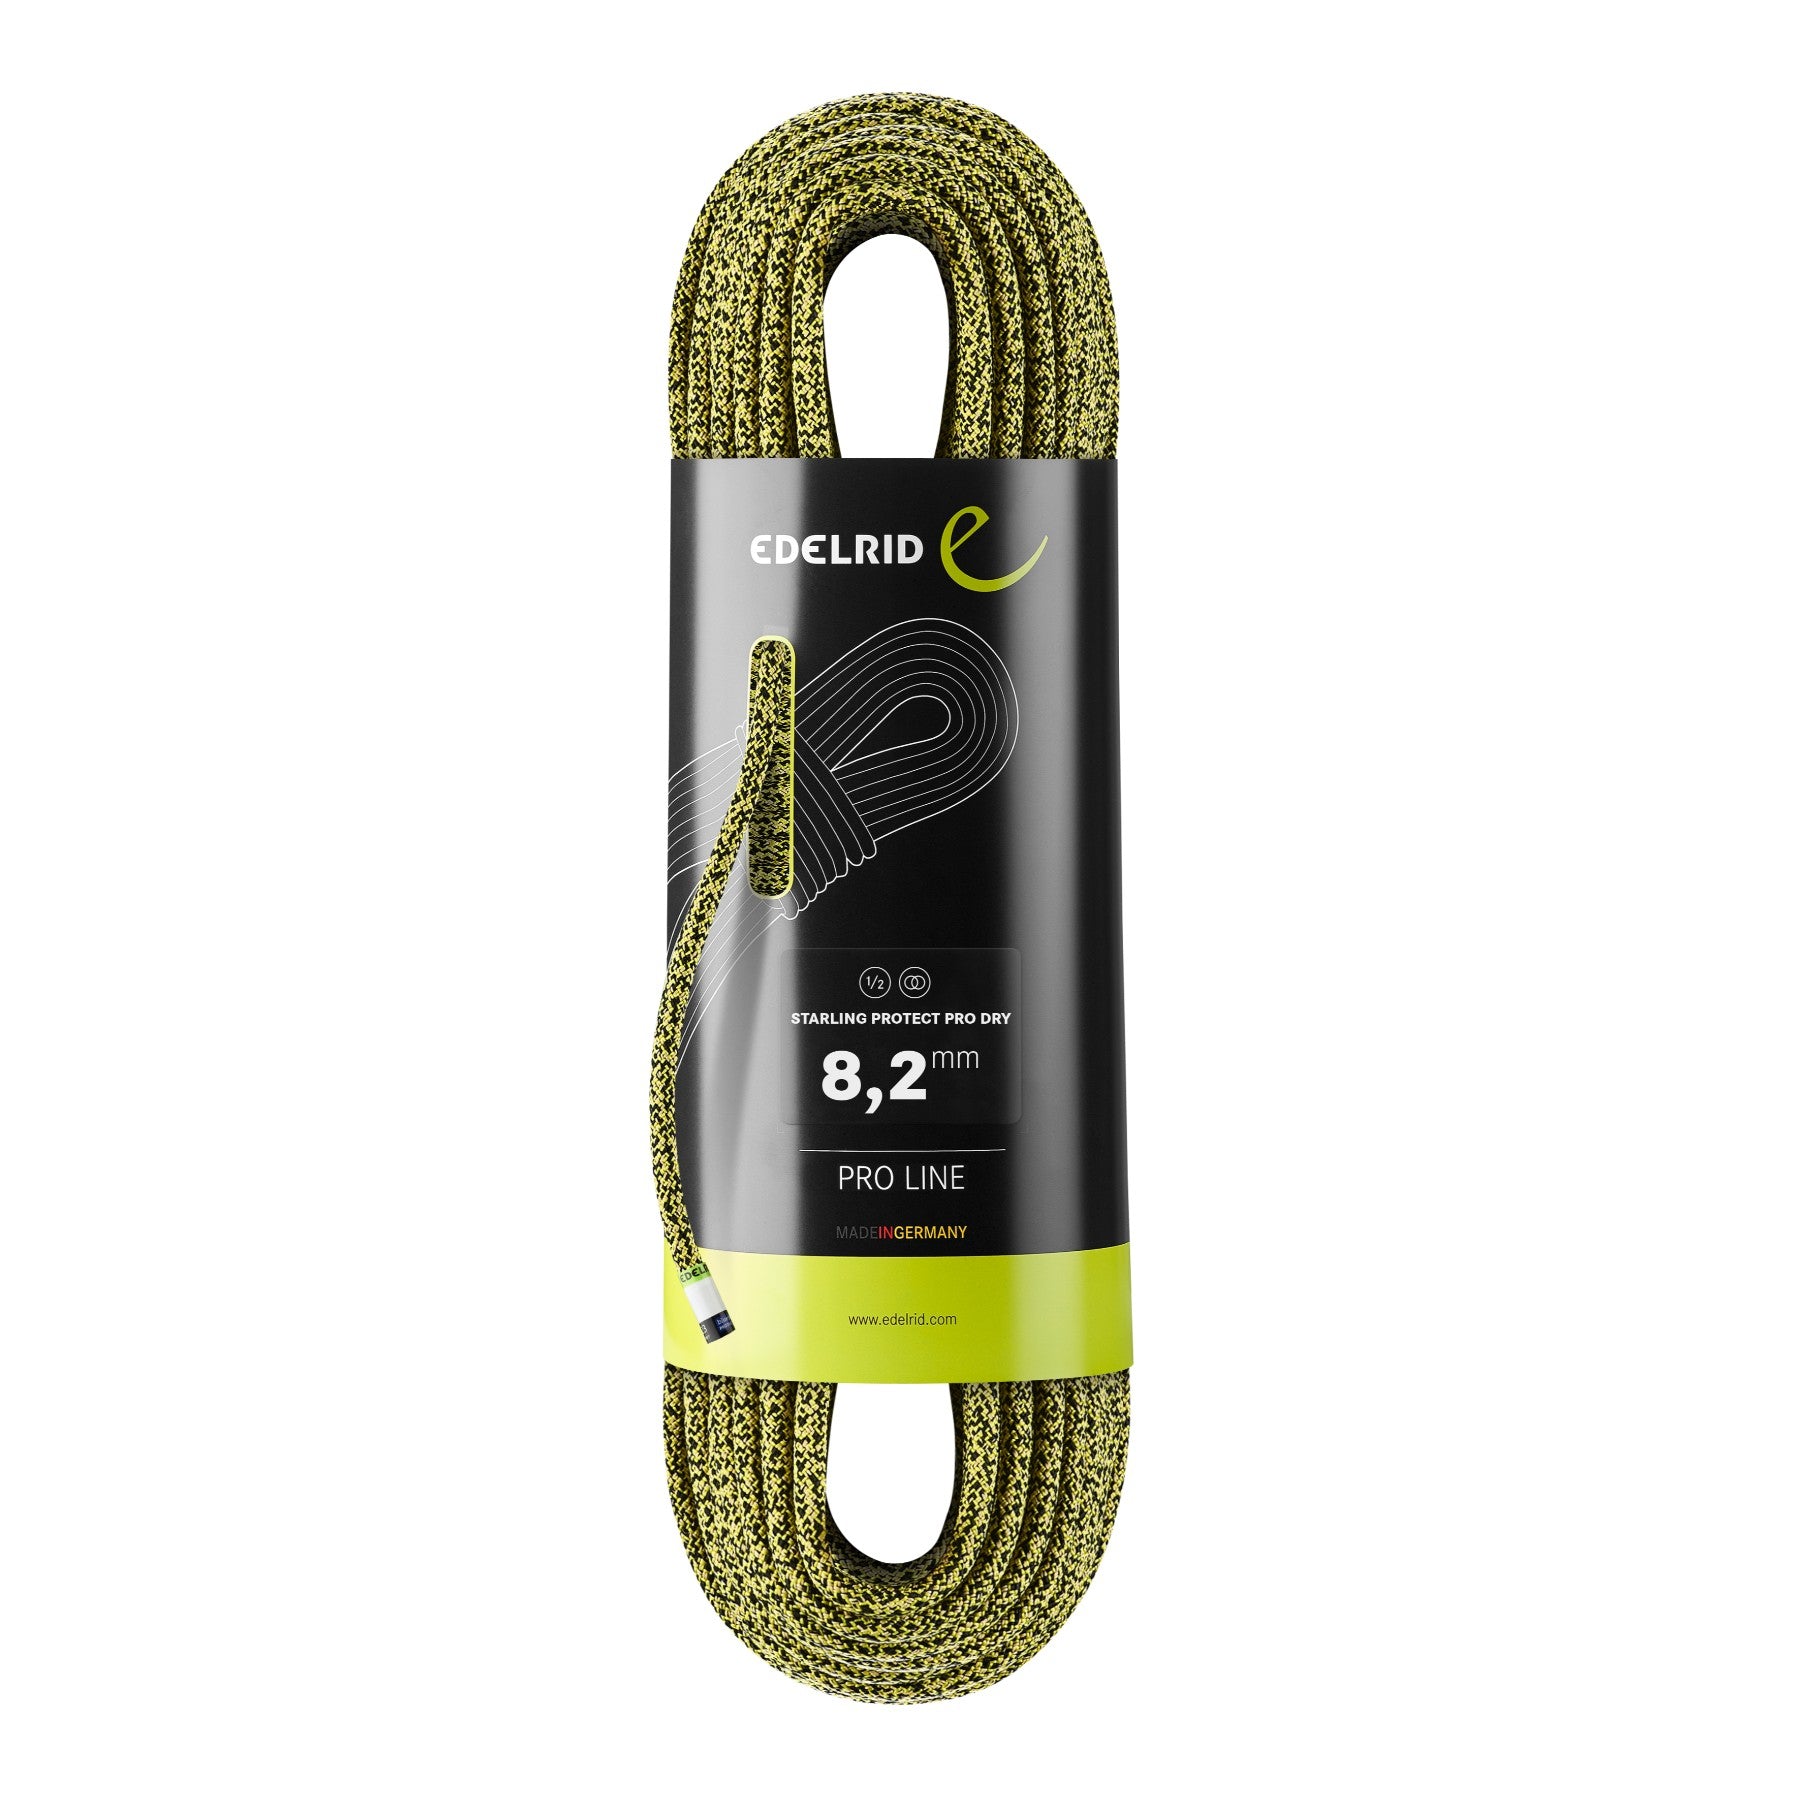 Edelrid Starling Protect Pro Dry 8.2mm x 60m, Colour Yellow-Night